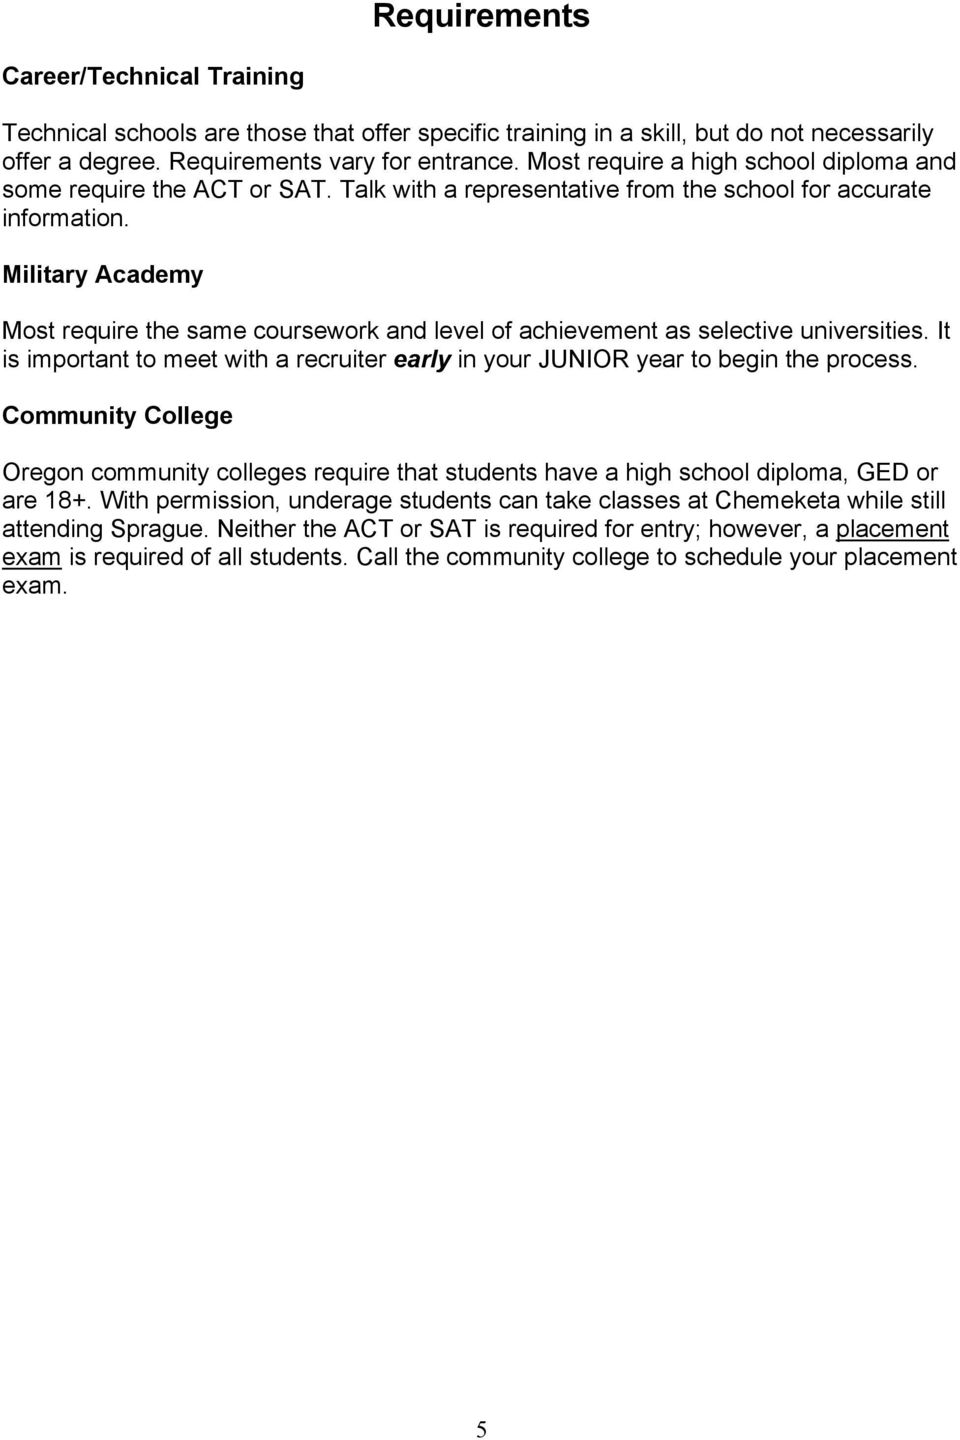 Military Academy Most require the same coursework and level of achievement as selective universities. It is important to meet with a recruiter early in your JUNIOR year to begin the process.